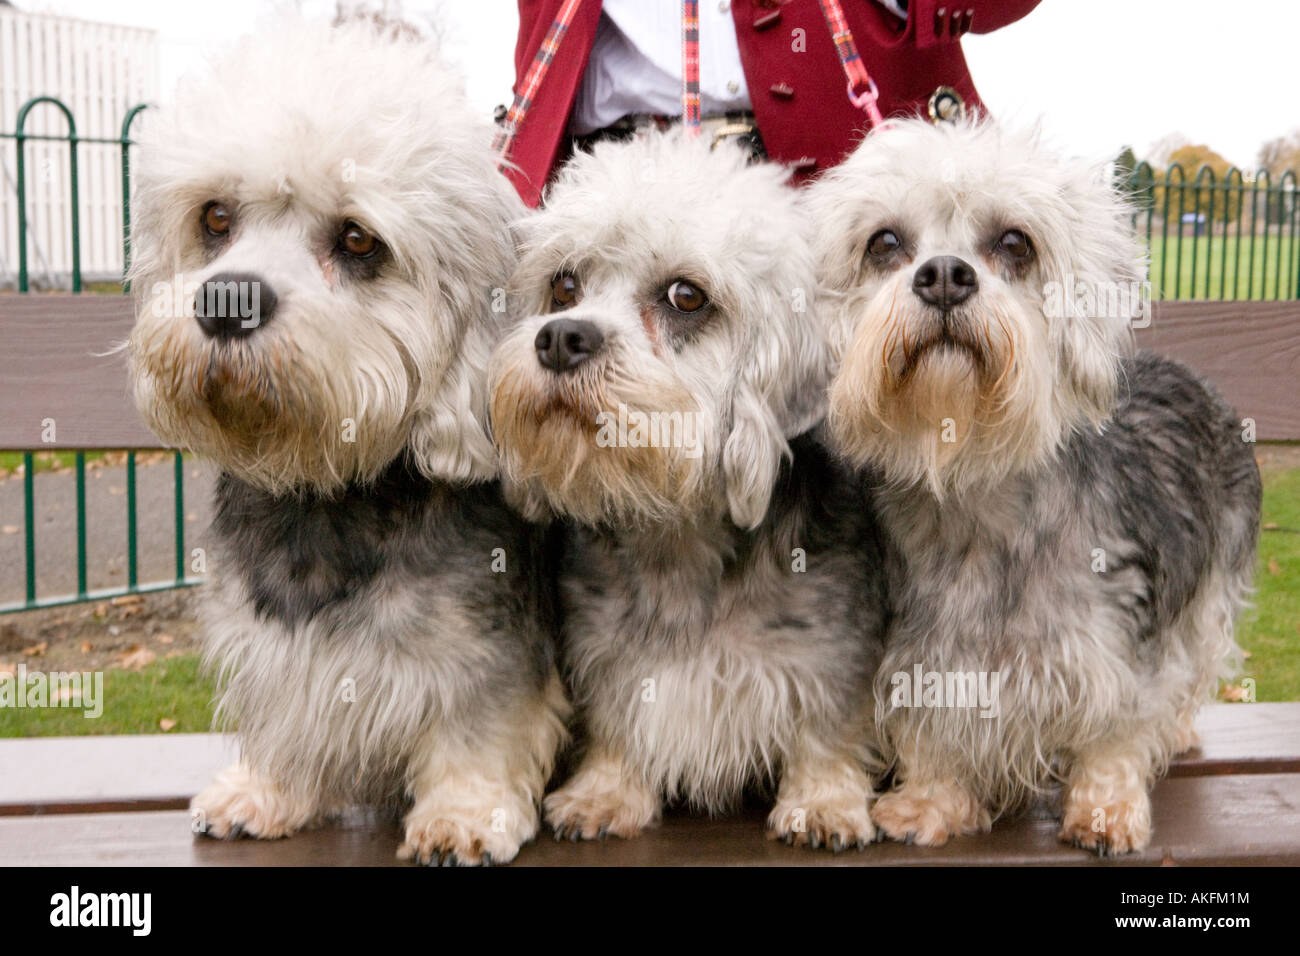 Dandie Dinmont terriers: The dogs with the soulful eyes who can't help but  make you smile